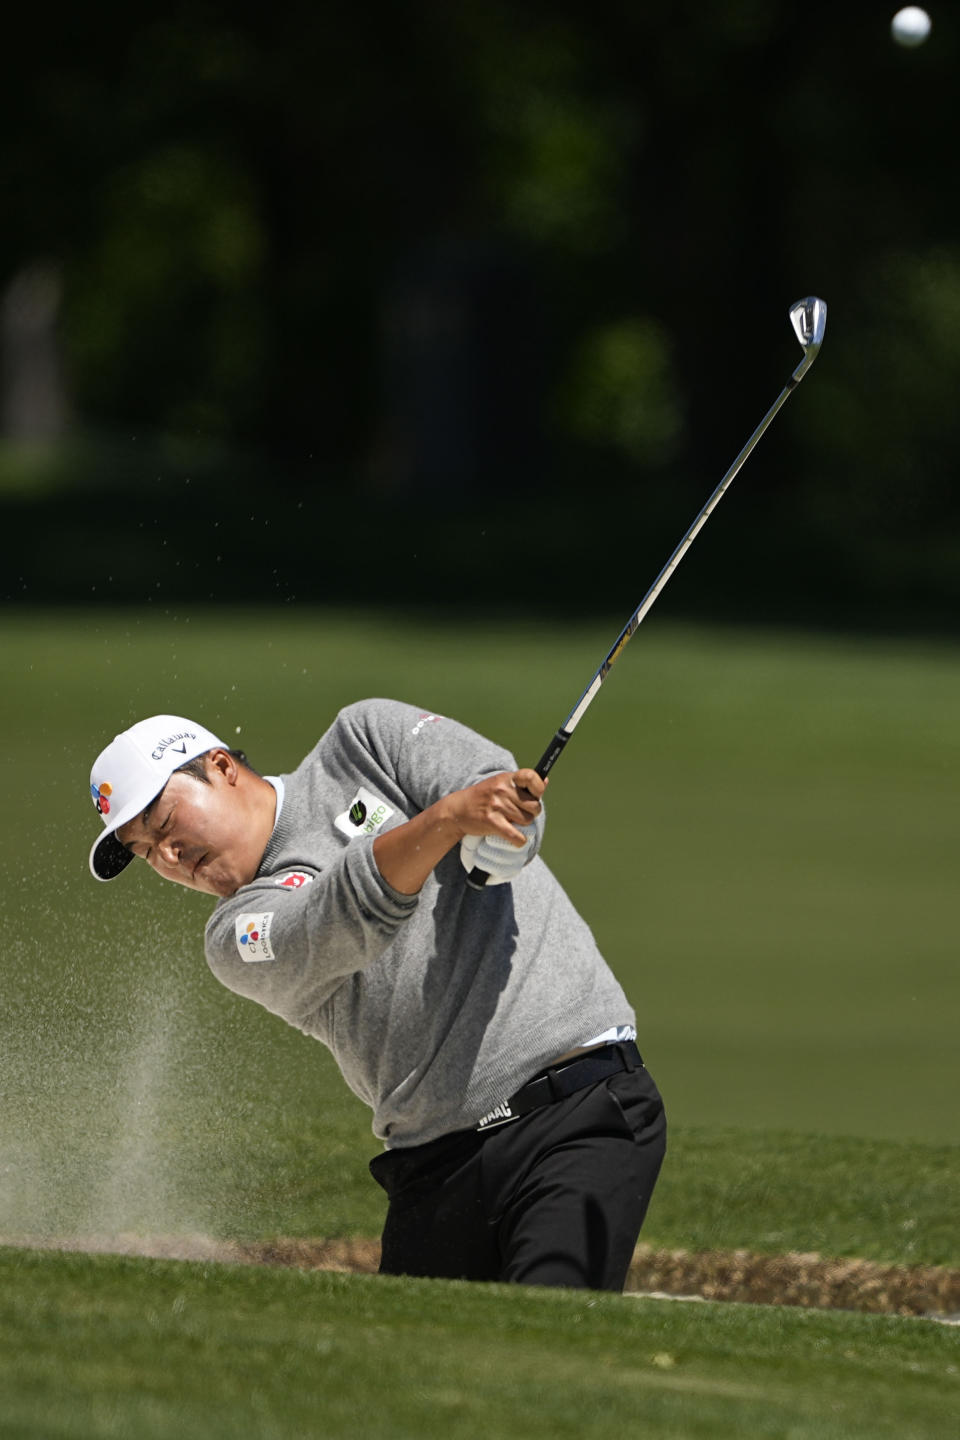 K. H. Lee, of South Korea, hits from the bunker on the 16th hole during first round of the Wells Fargo Championship golf tournament at the Quail Hollow Club on Thursday, May 4, 2023, in Charlotte, N.C. (AP Photo/Chris Carlson)